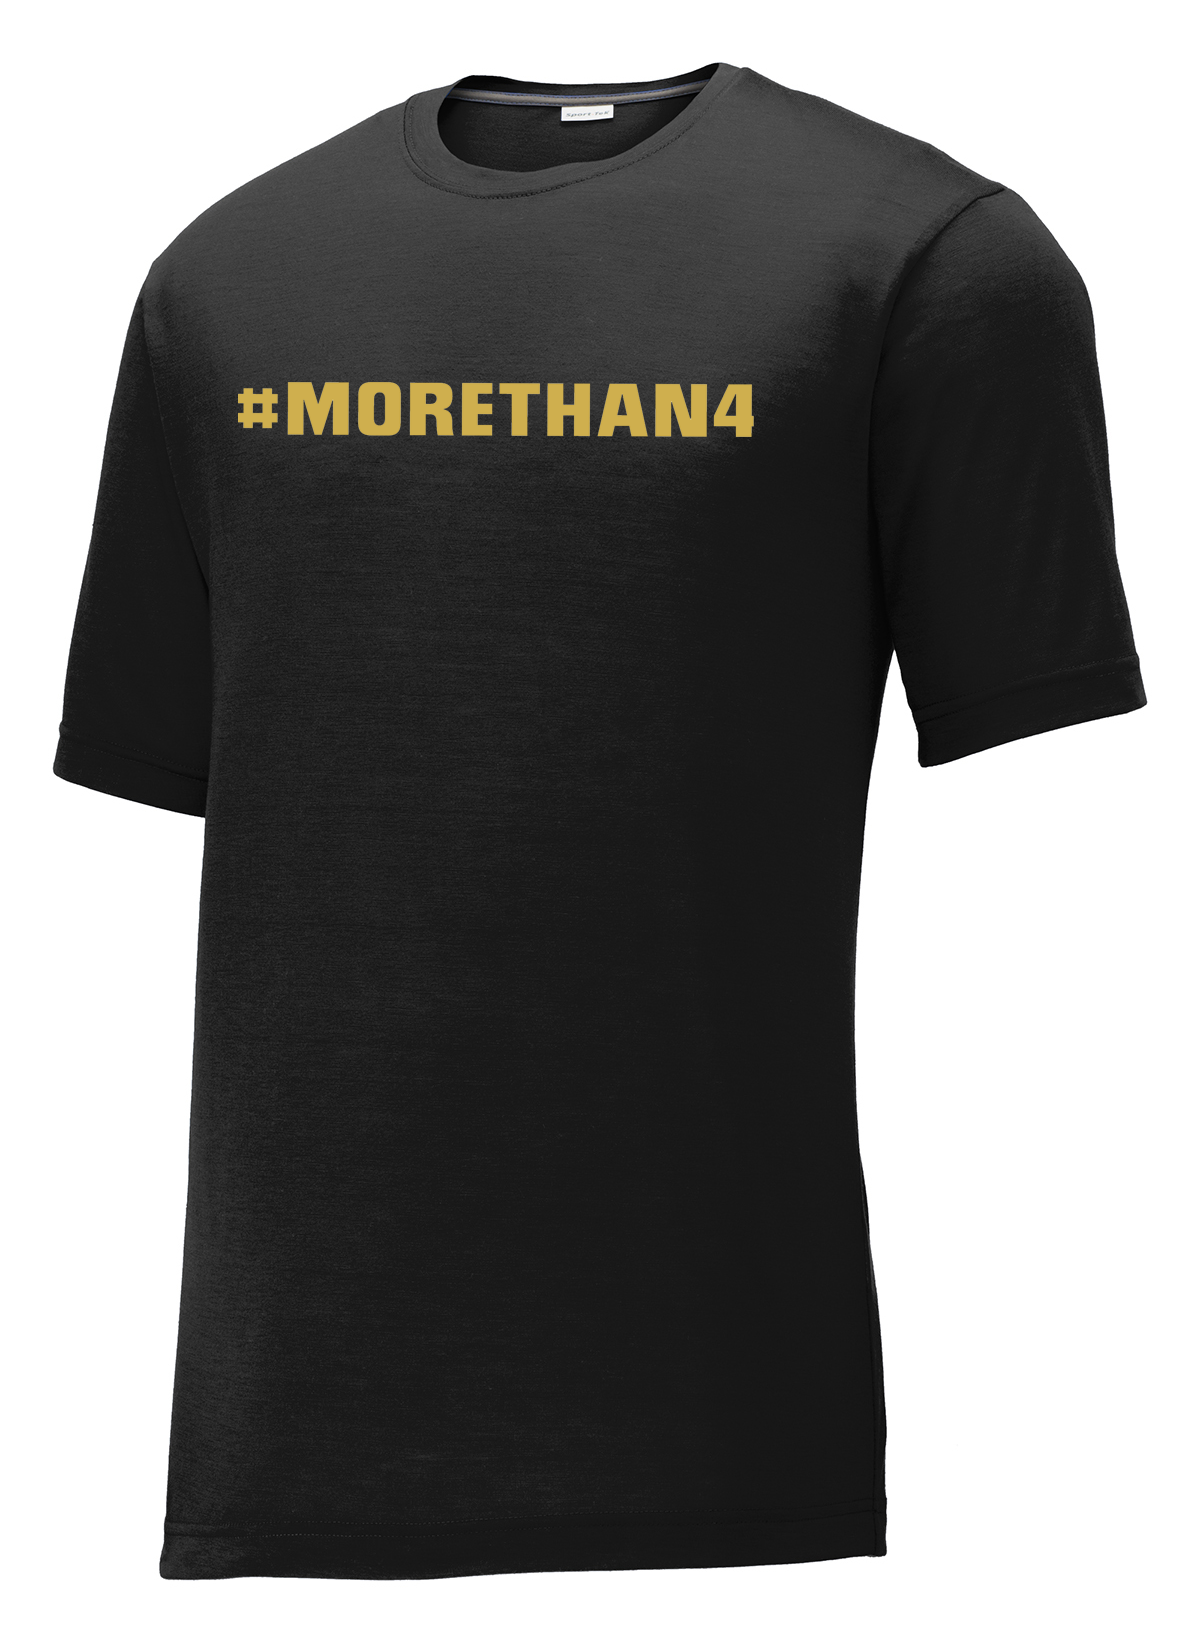 #MORETHAN4 CottonTouch Performance T-Shirt